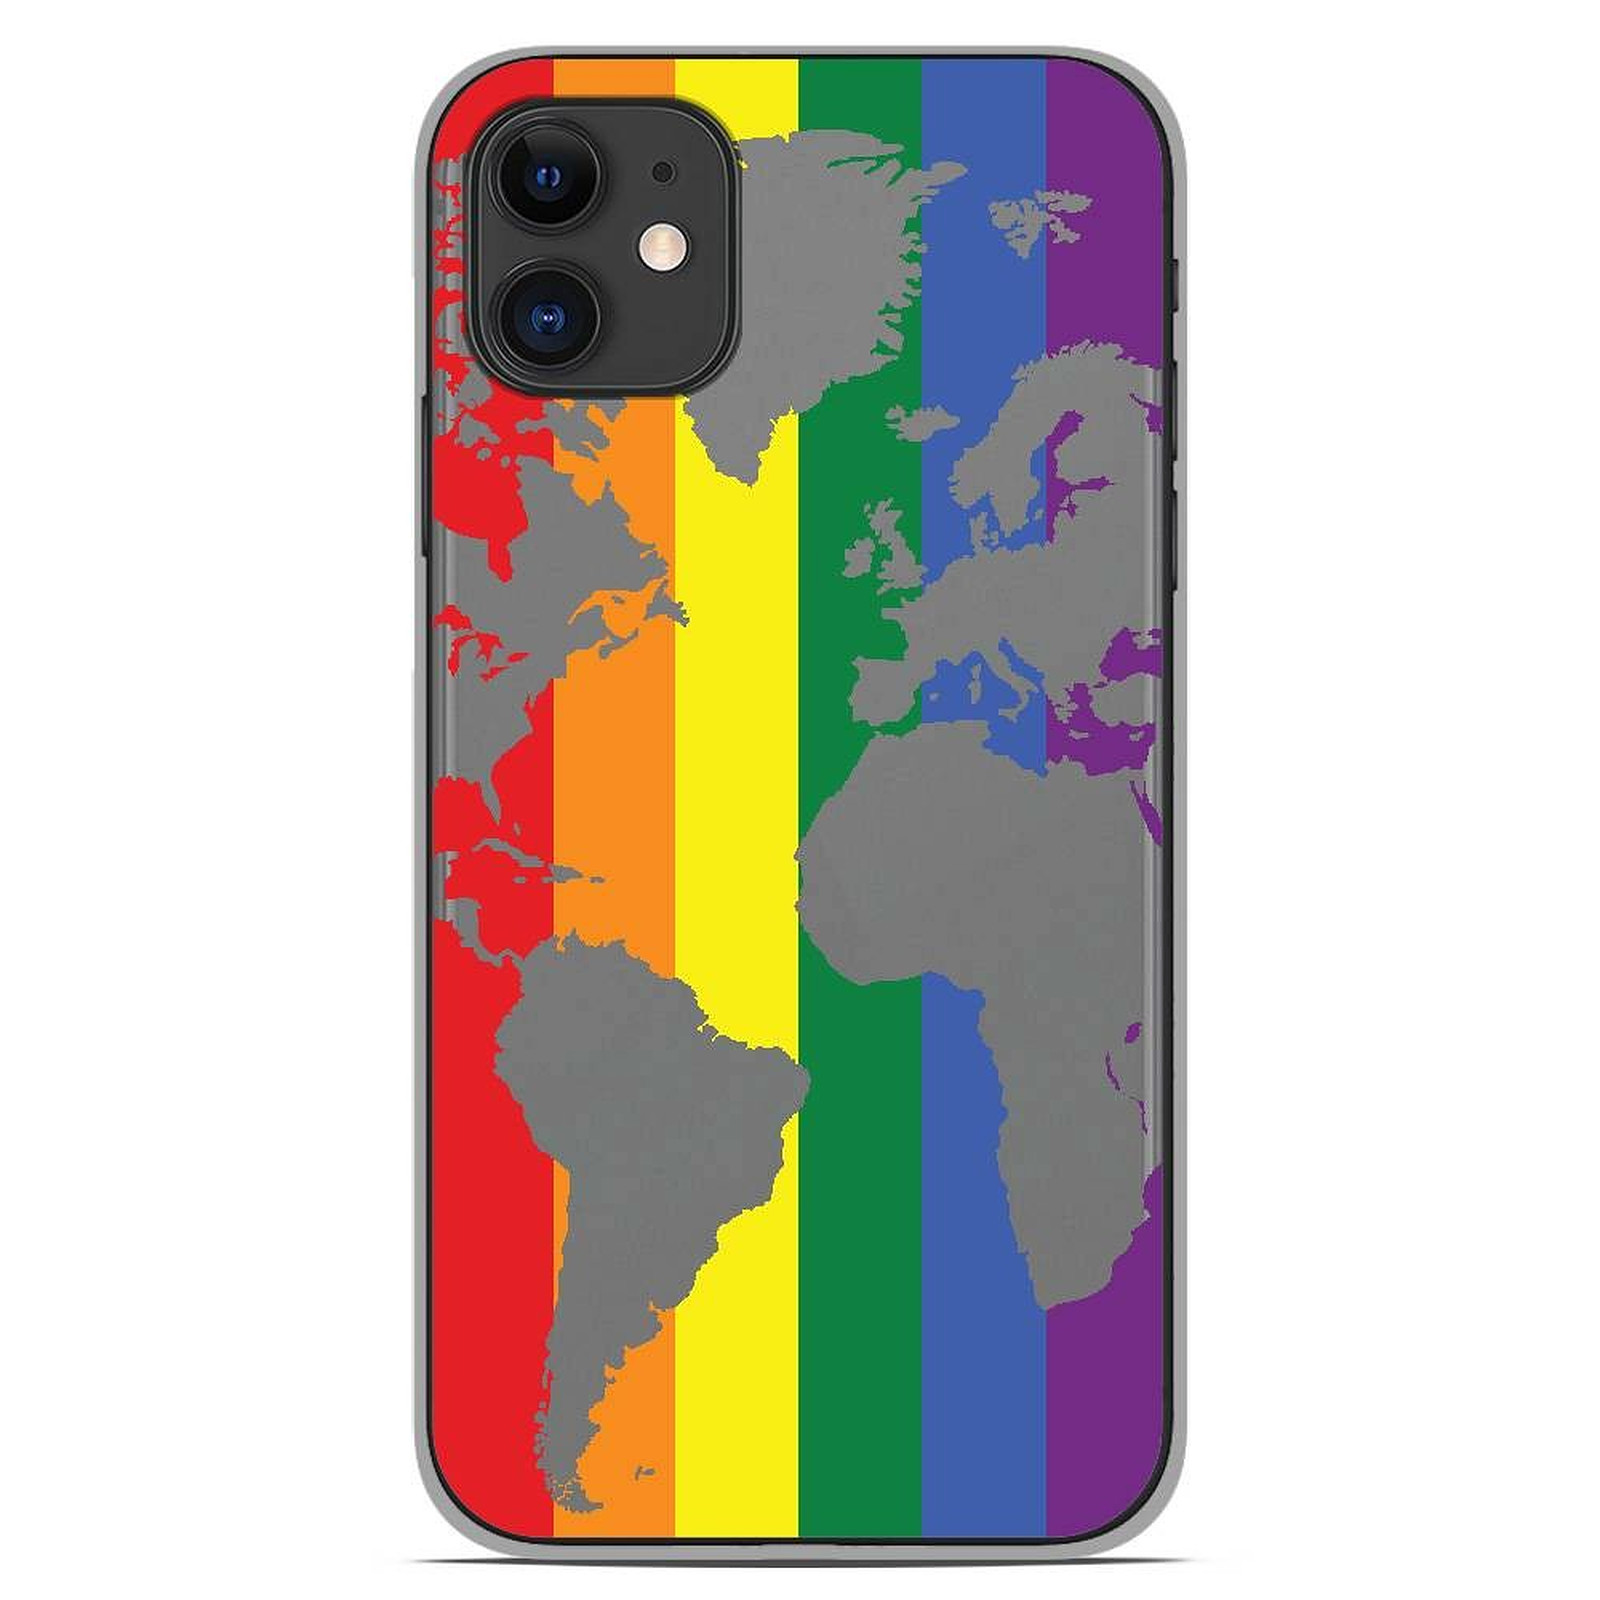 1001 Coques Coque silicone gel Apple iPhone 11 motif Map LGBT - Coque telephone 1001Coques